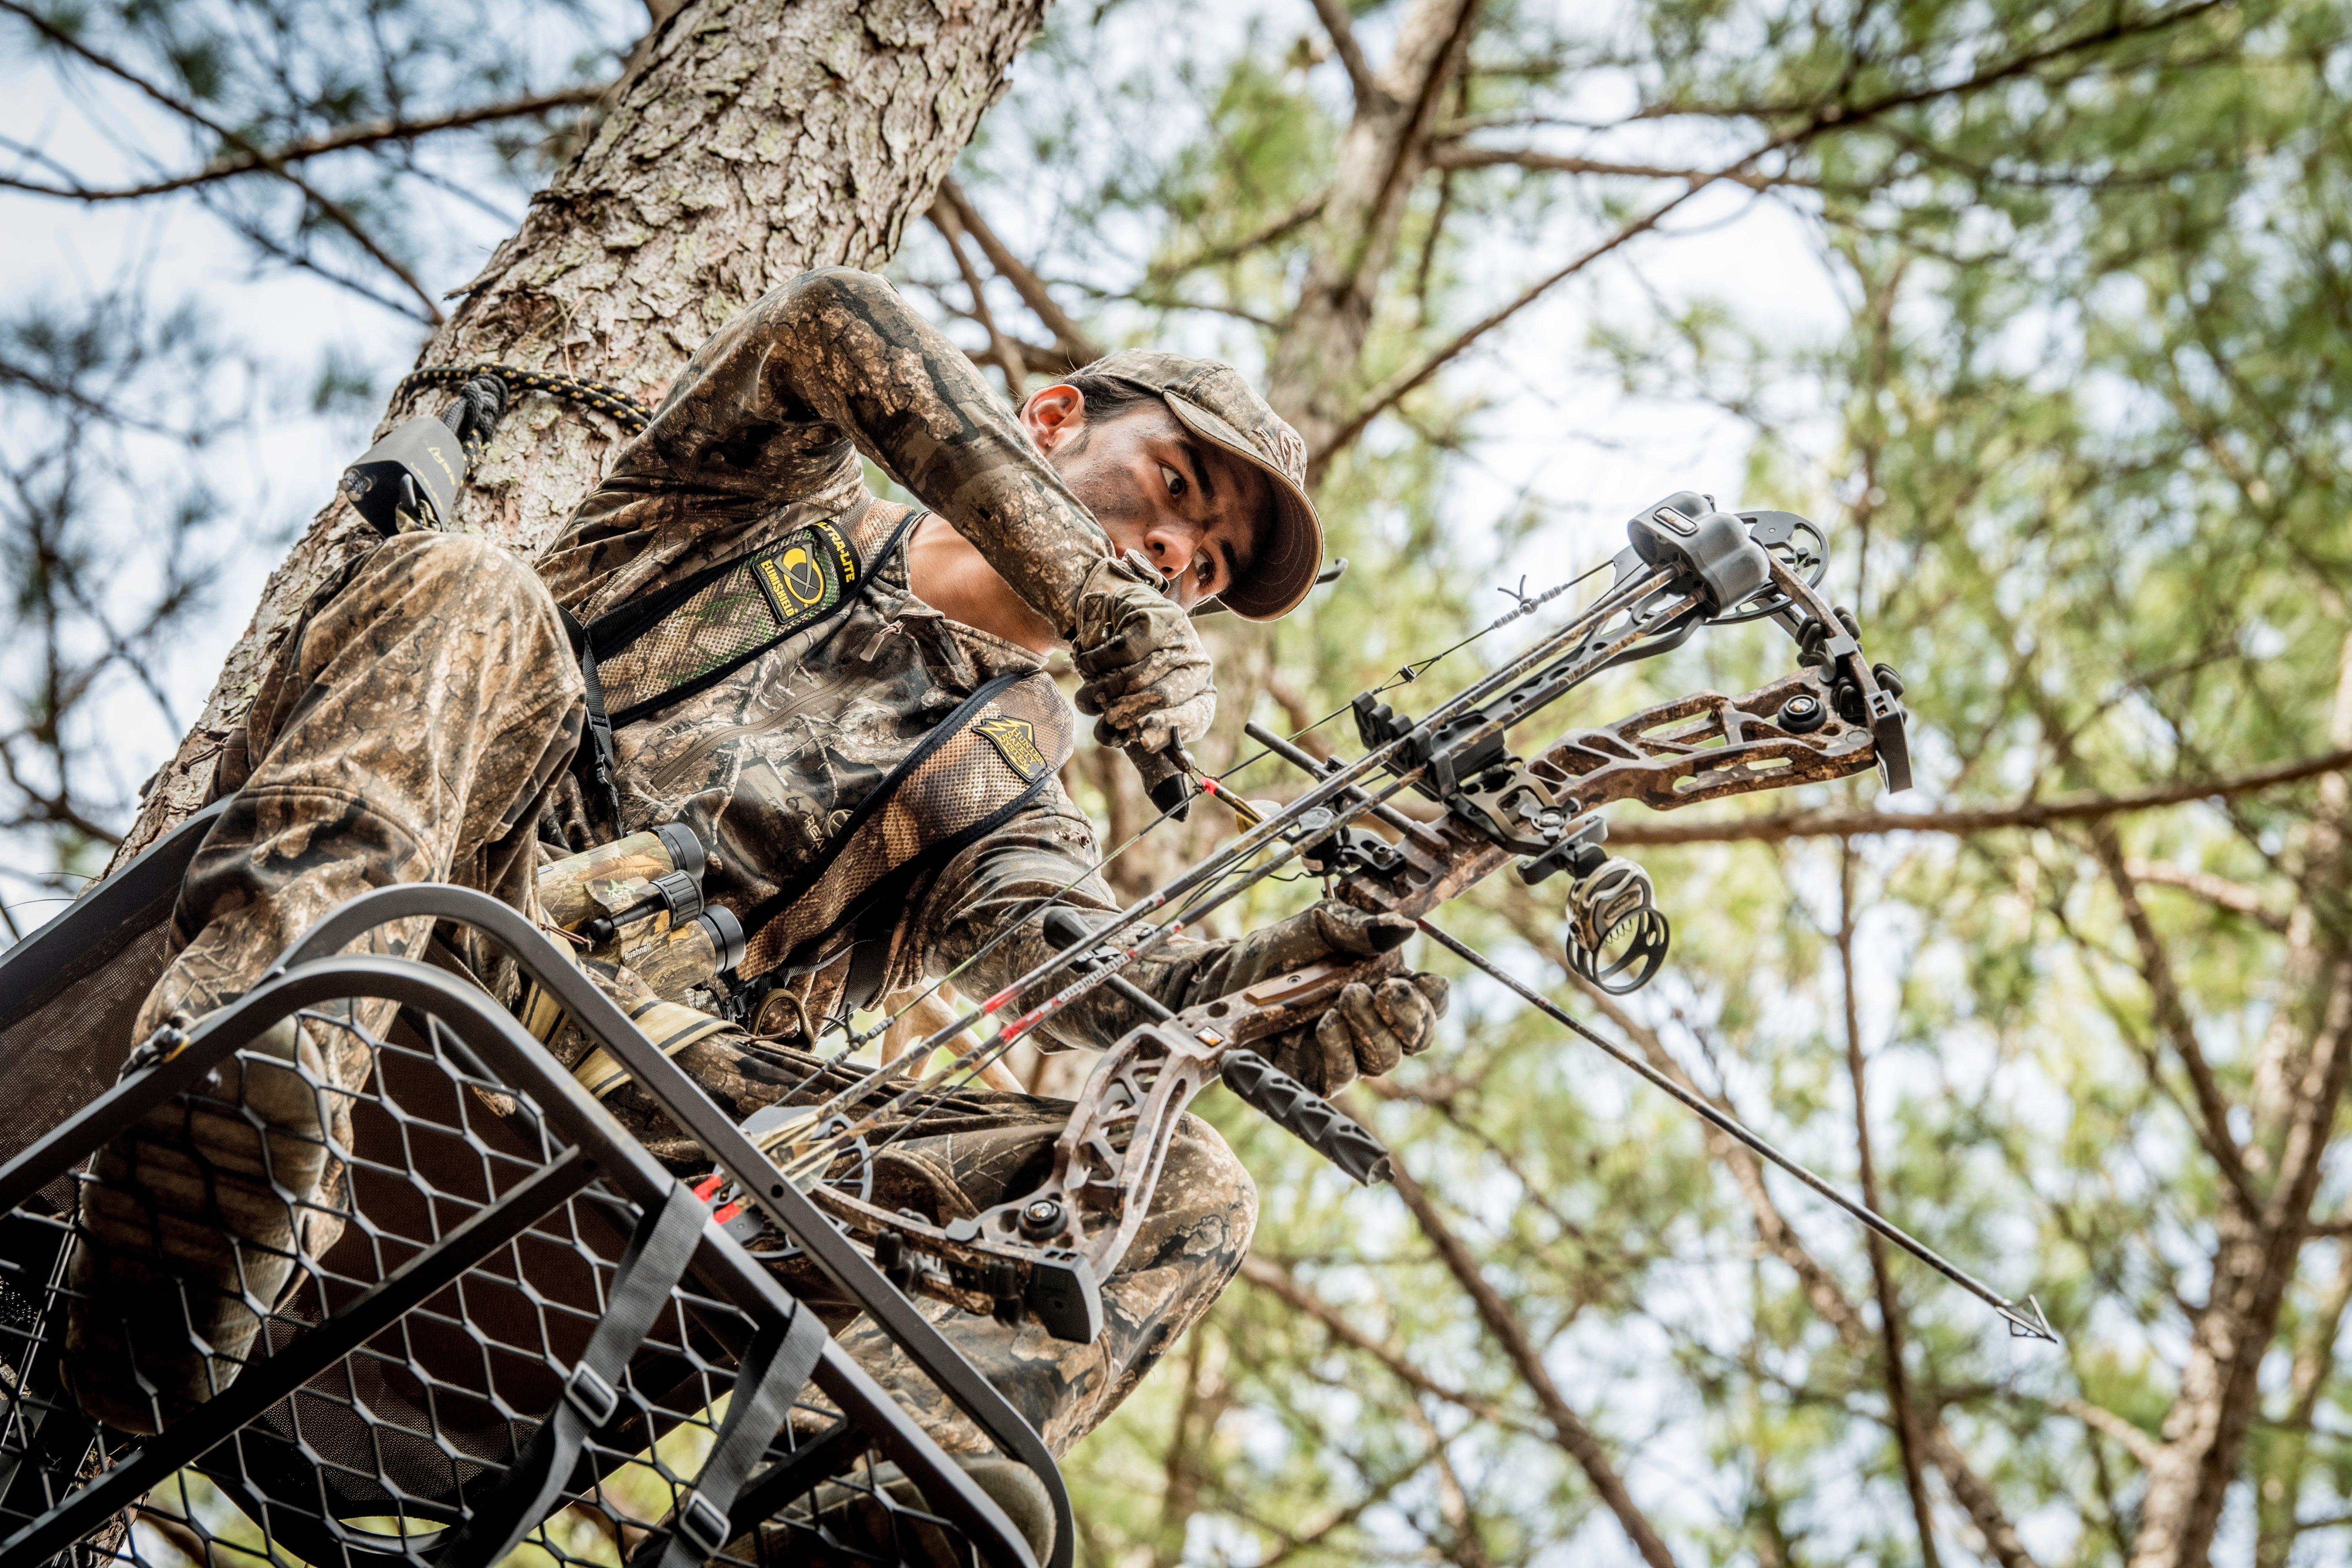 Many states have long since dropped minimum poundage requirements, but you still need enough thump to do the job. Image by Realtree